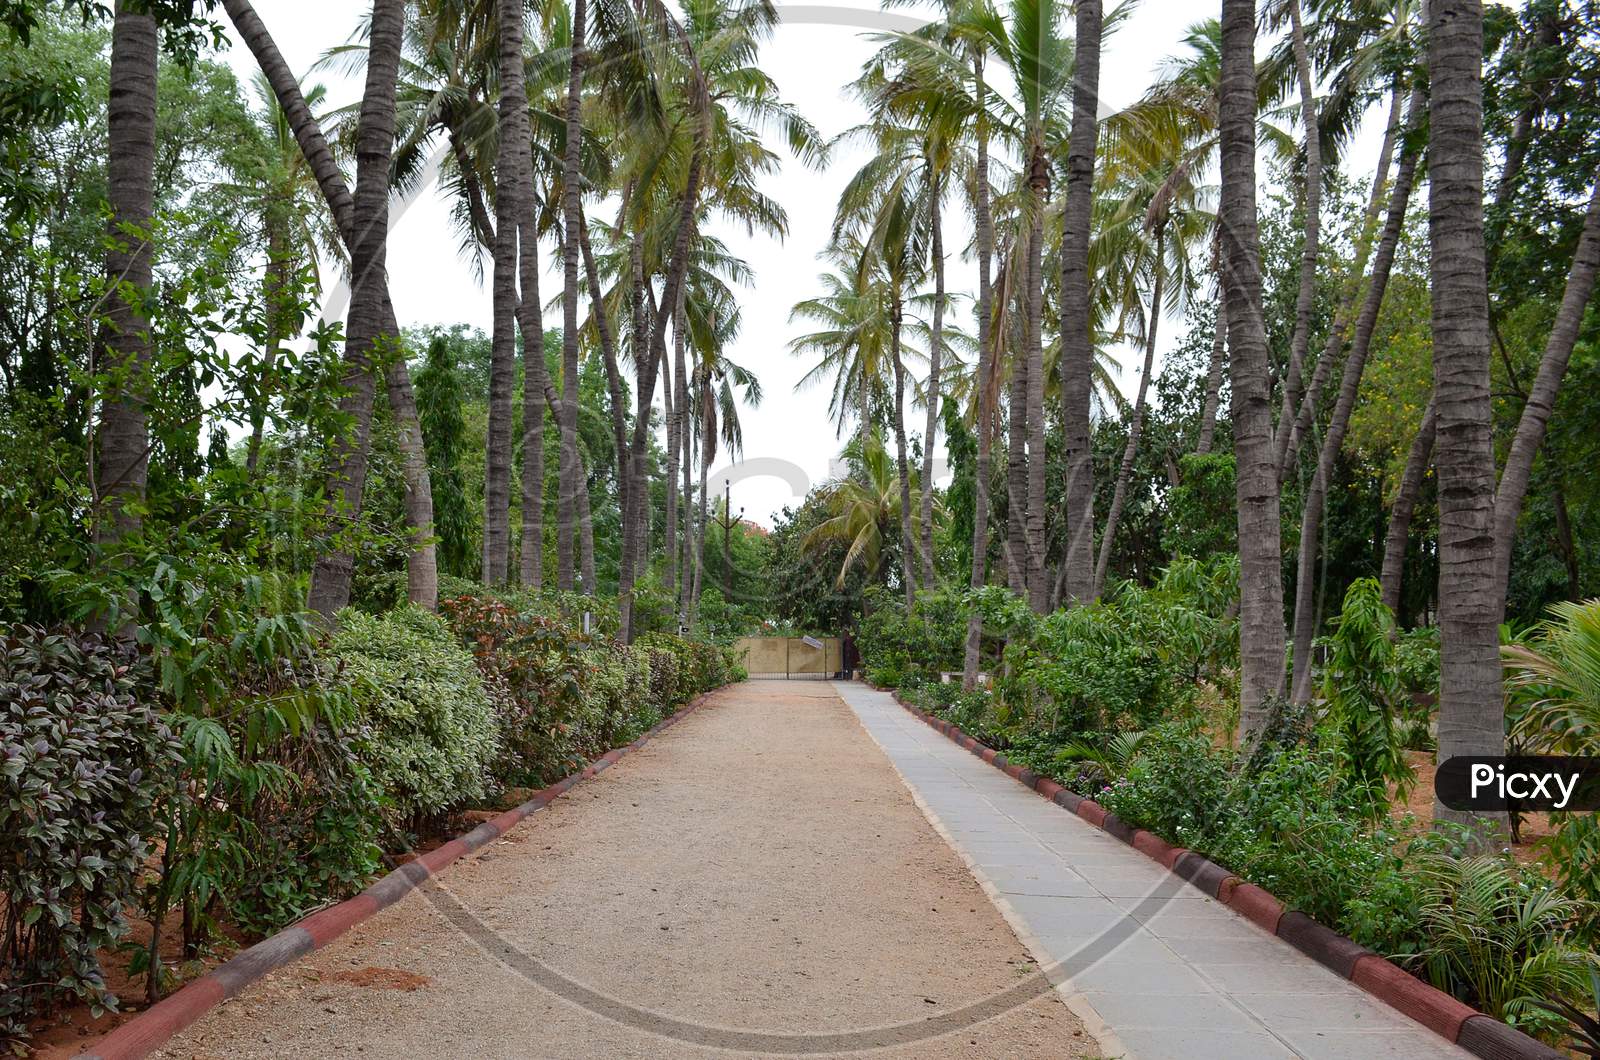 Pathway With Palm Trees